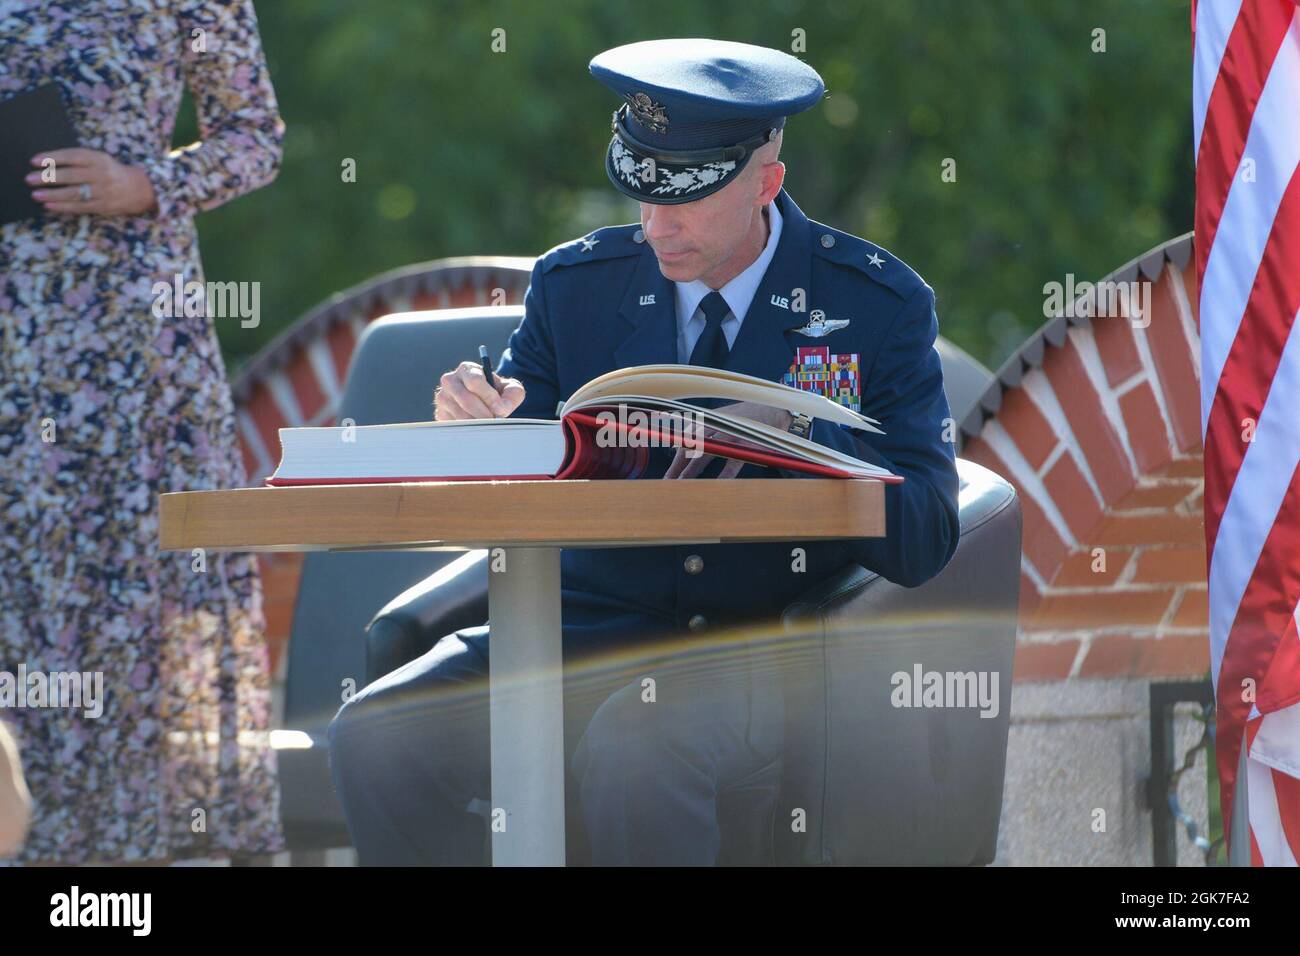 U.S. Air Force Brig. Gen. Jason E. Bailey, 31st Fighter Wing commander, signs a visitor’s book at the Andraž ceremony in Andraž nod Polzelo, Slovenia, Aug. 25, 2021. In 1944, the U.S. B-17 bomber ‘Dark Eyes’ was shot down over Andraž nod Polzelo and the memorial to ‘Dark Eyes’ was dedicated on March 22, 2014. ‘Dark Eyes,’ is an American B-17 bomber that flew 80 missions during World War II in the skies above occupied France, Italy, and Nazi Germany. Stock Photo